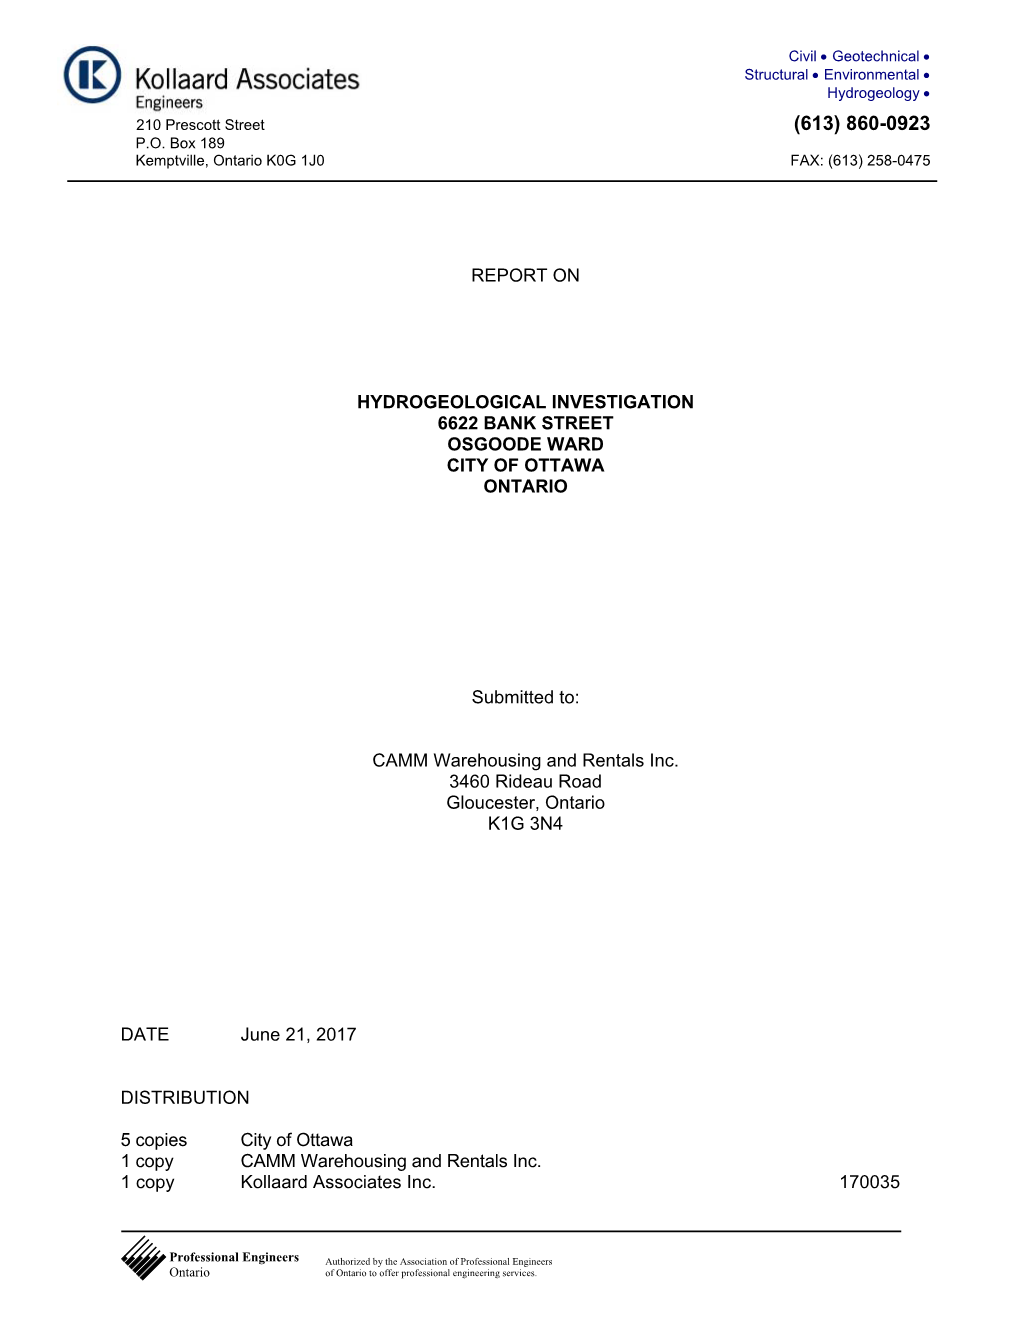 Report on Hydrogeological Investigation